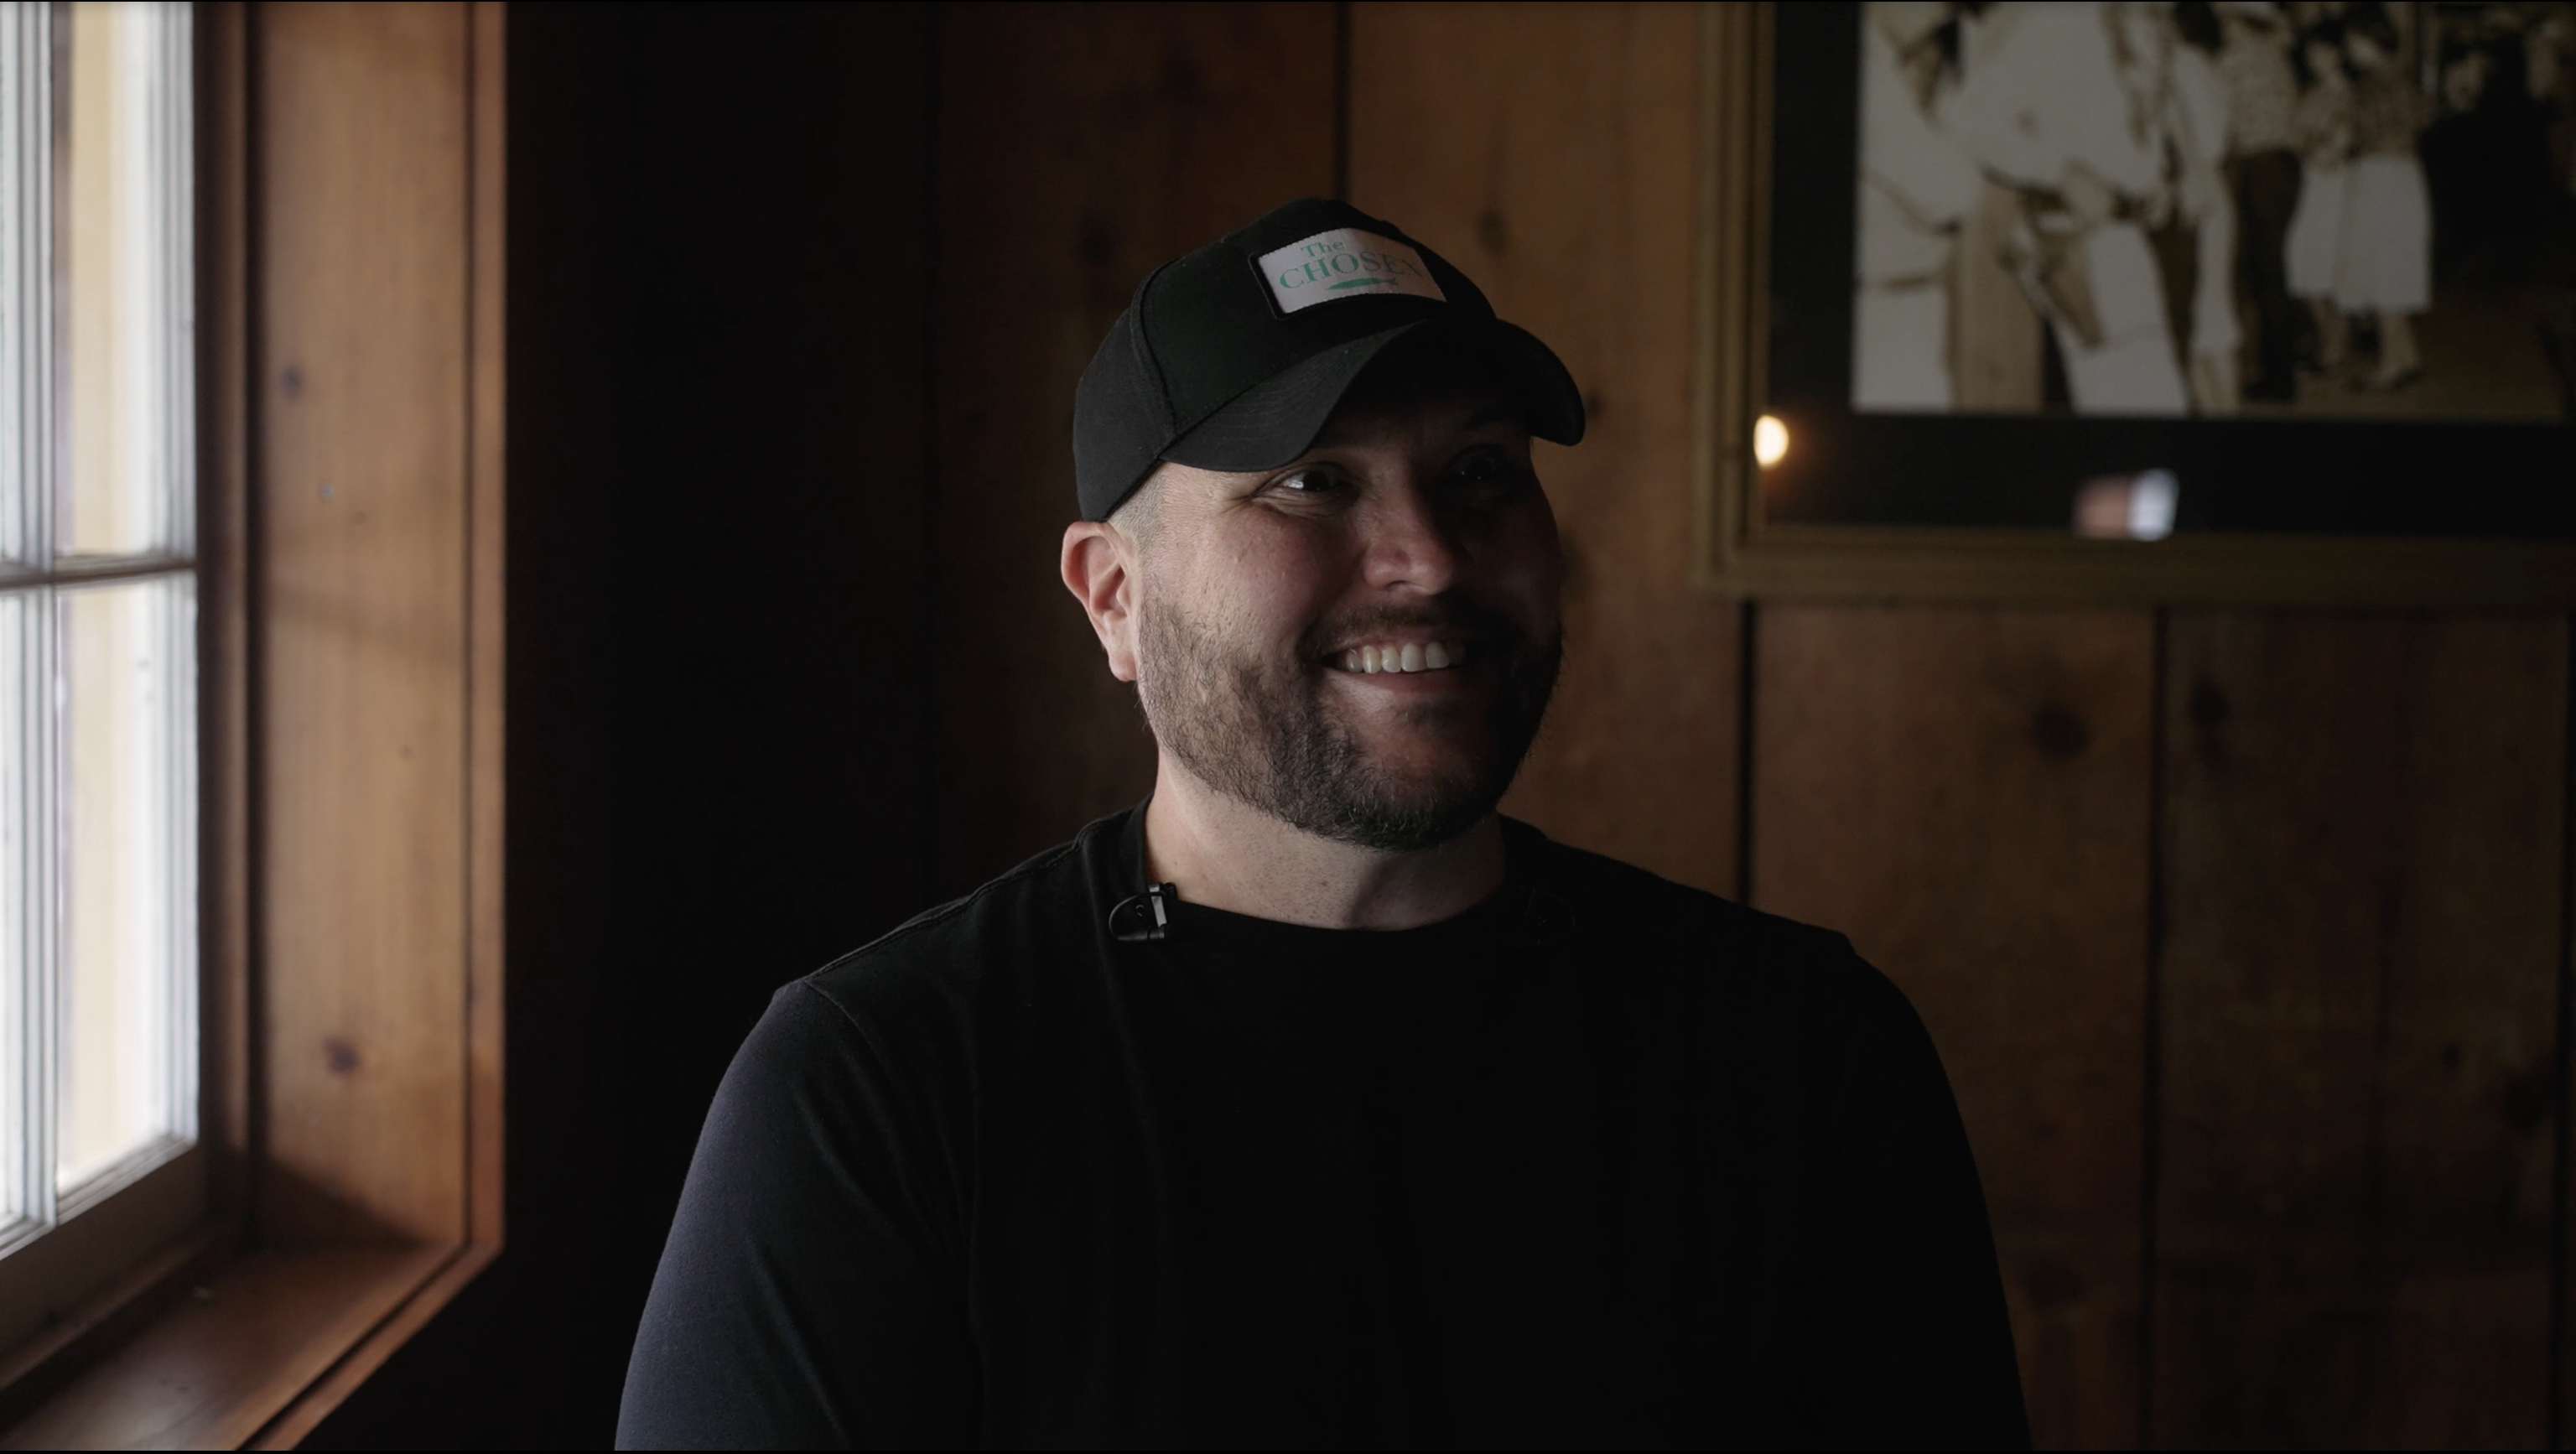 Micah Tyler wearing a black shirt and black baseball cap as he smiles at the camera during his most recent BRIGHT-FM interview